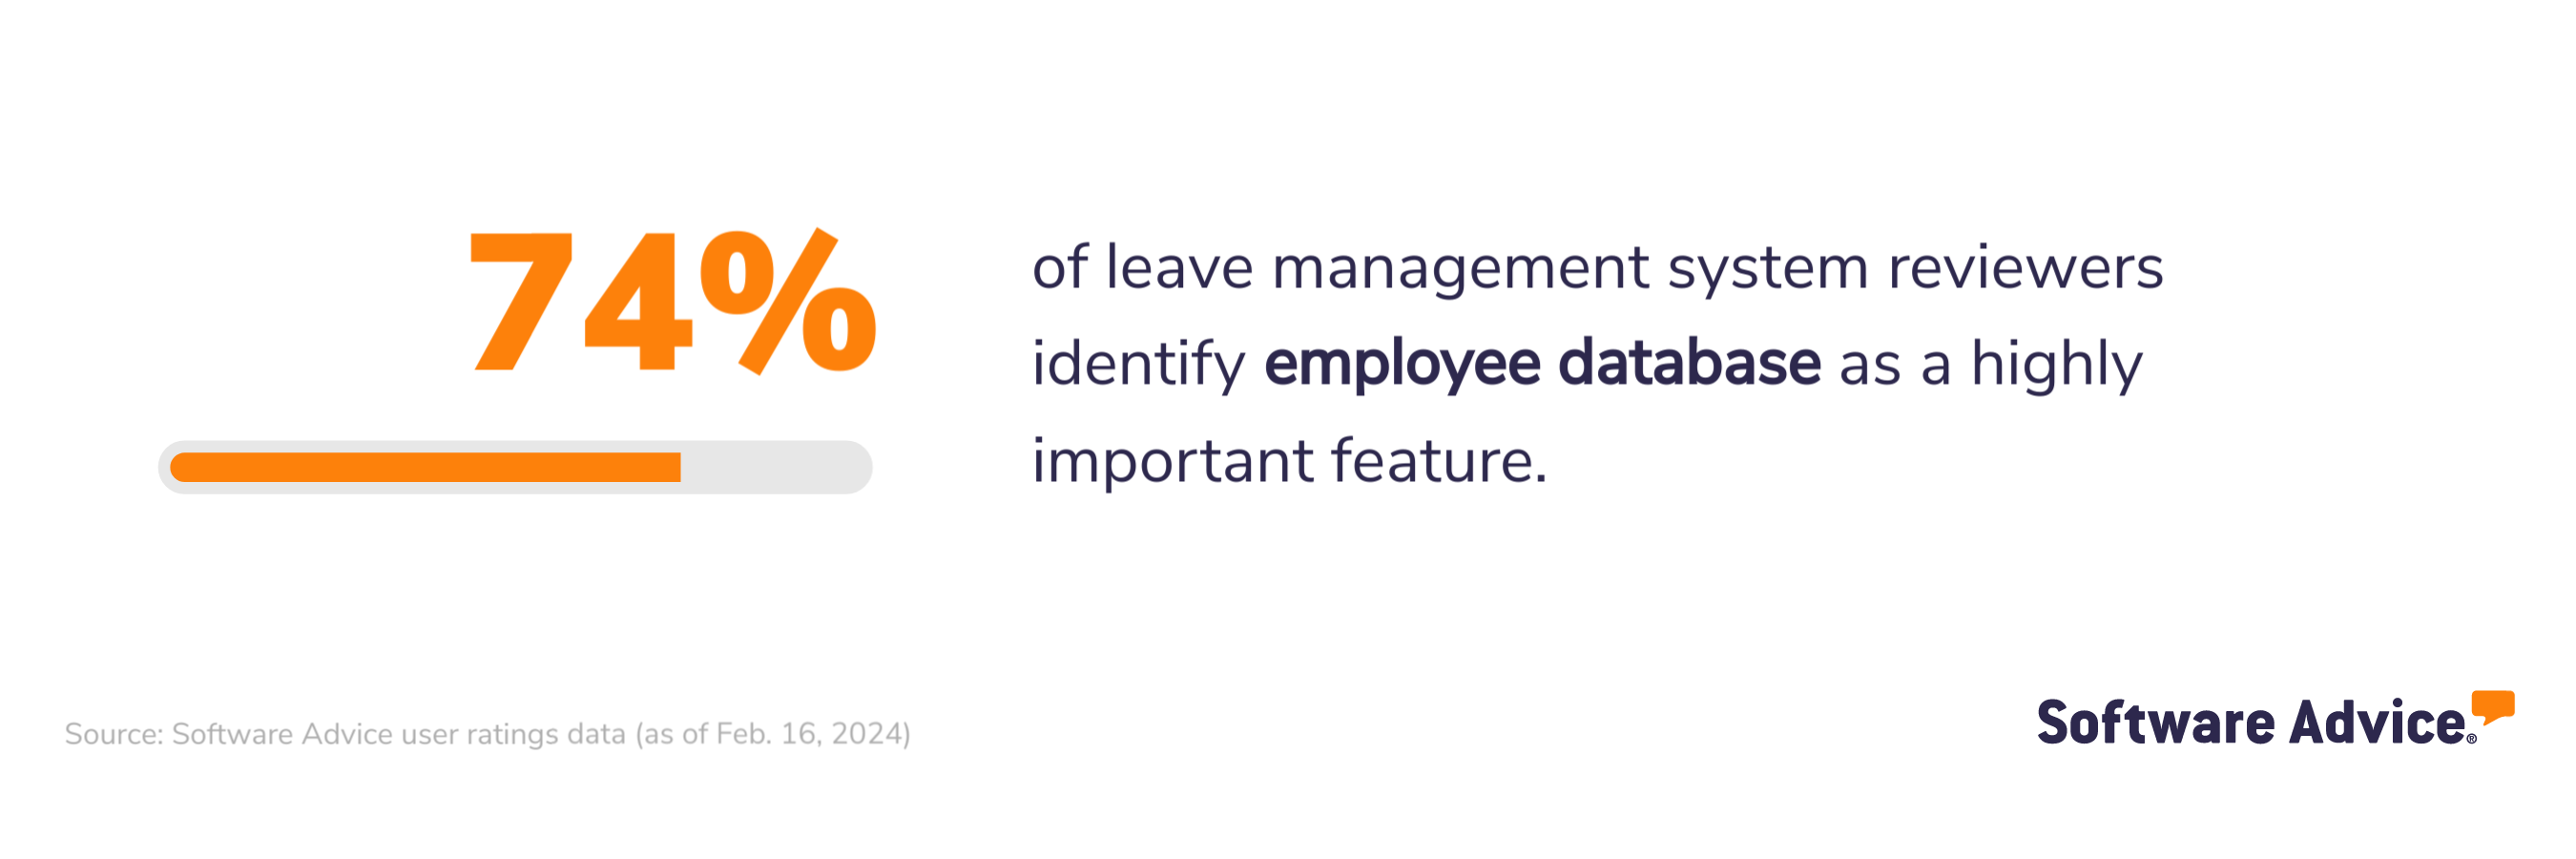 74% of leave management system reviewers identify employee database as a highly important feature.